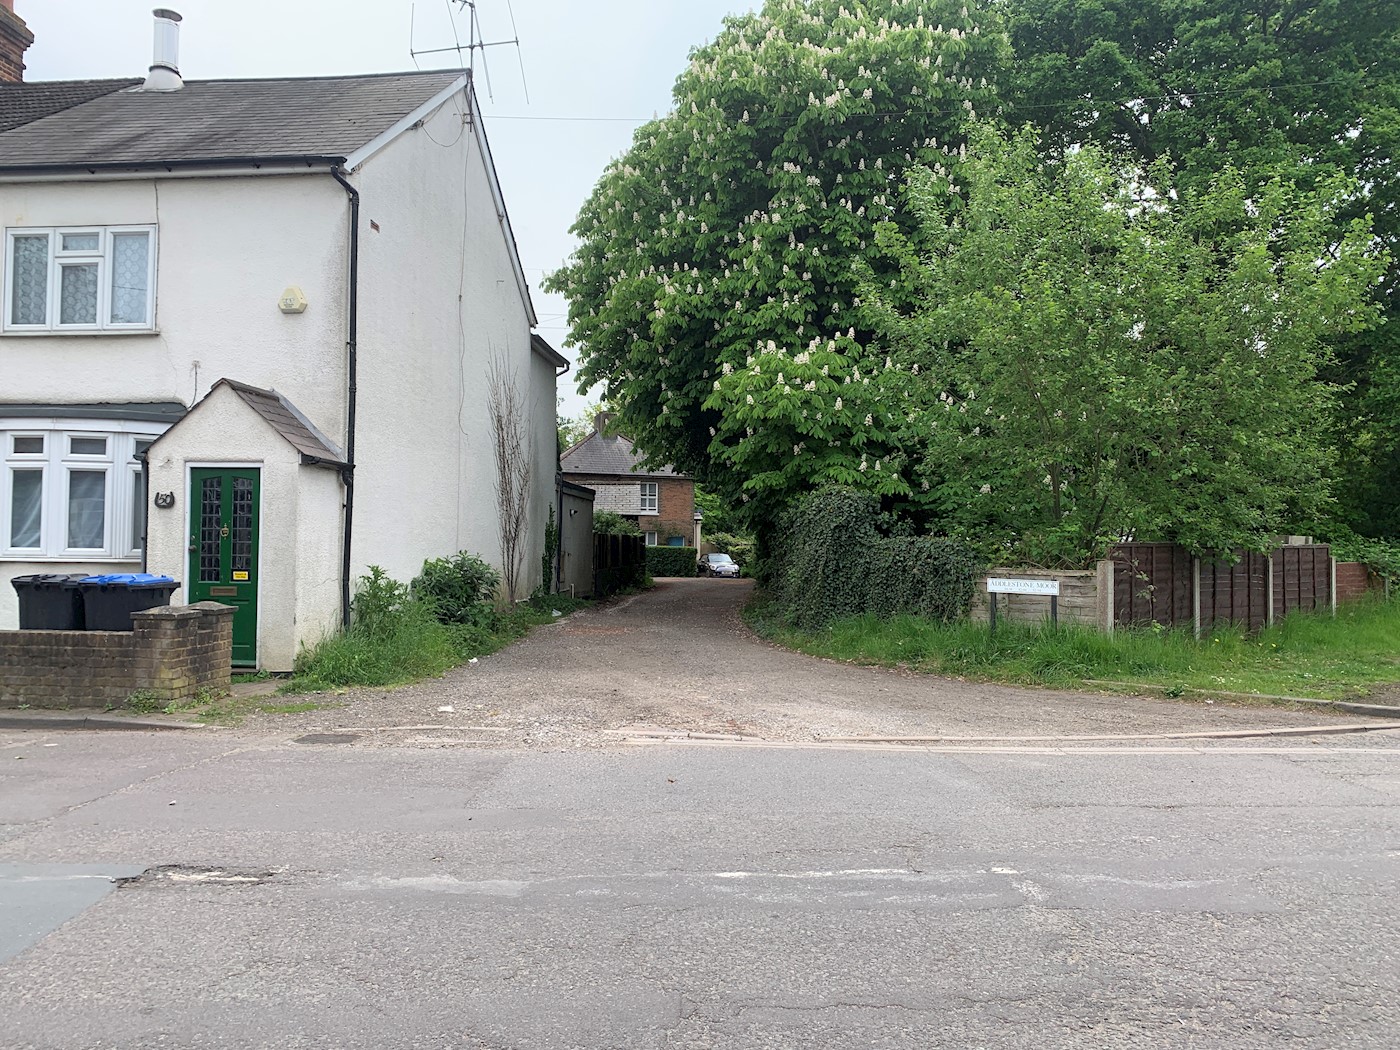 Driveway and land to the rear of 50 Addlestone Moor, Addlestone, KT15 2QL 1/10